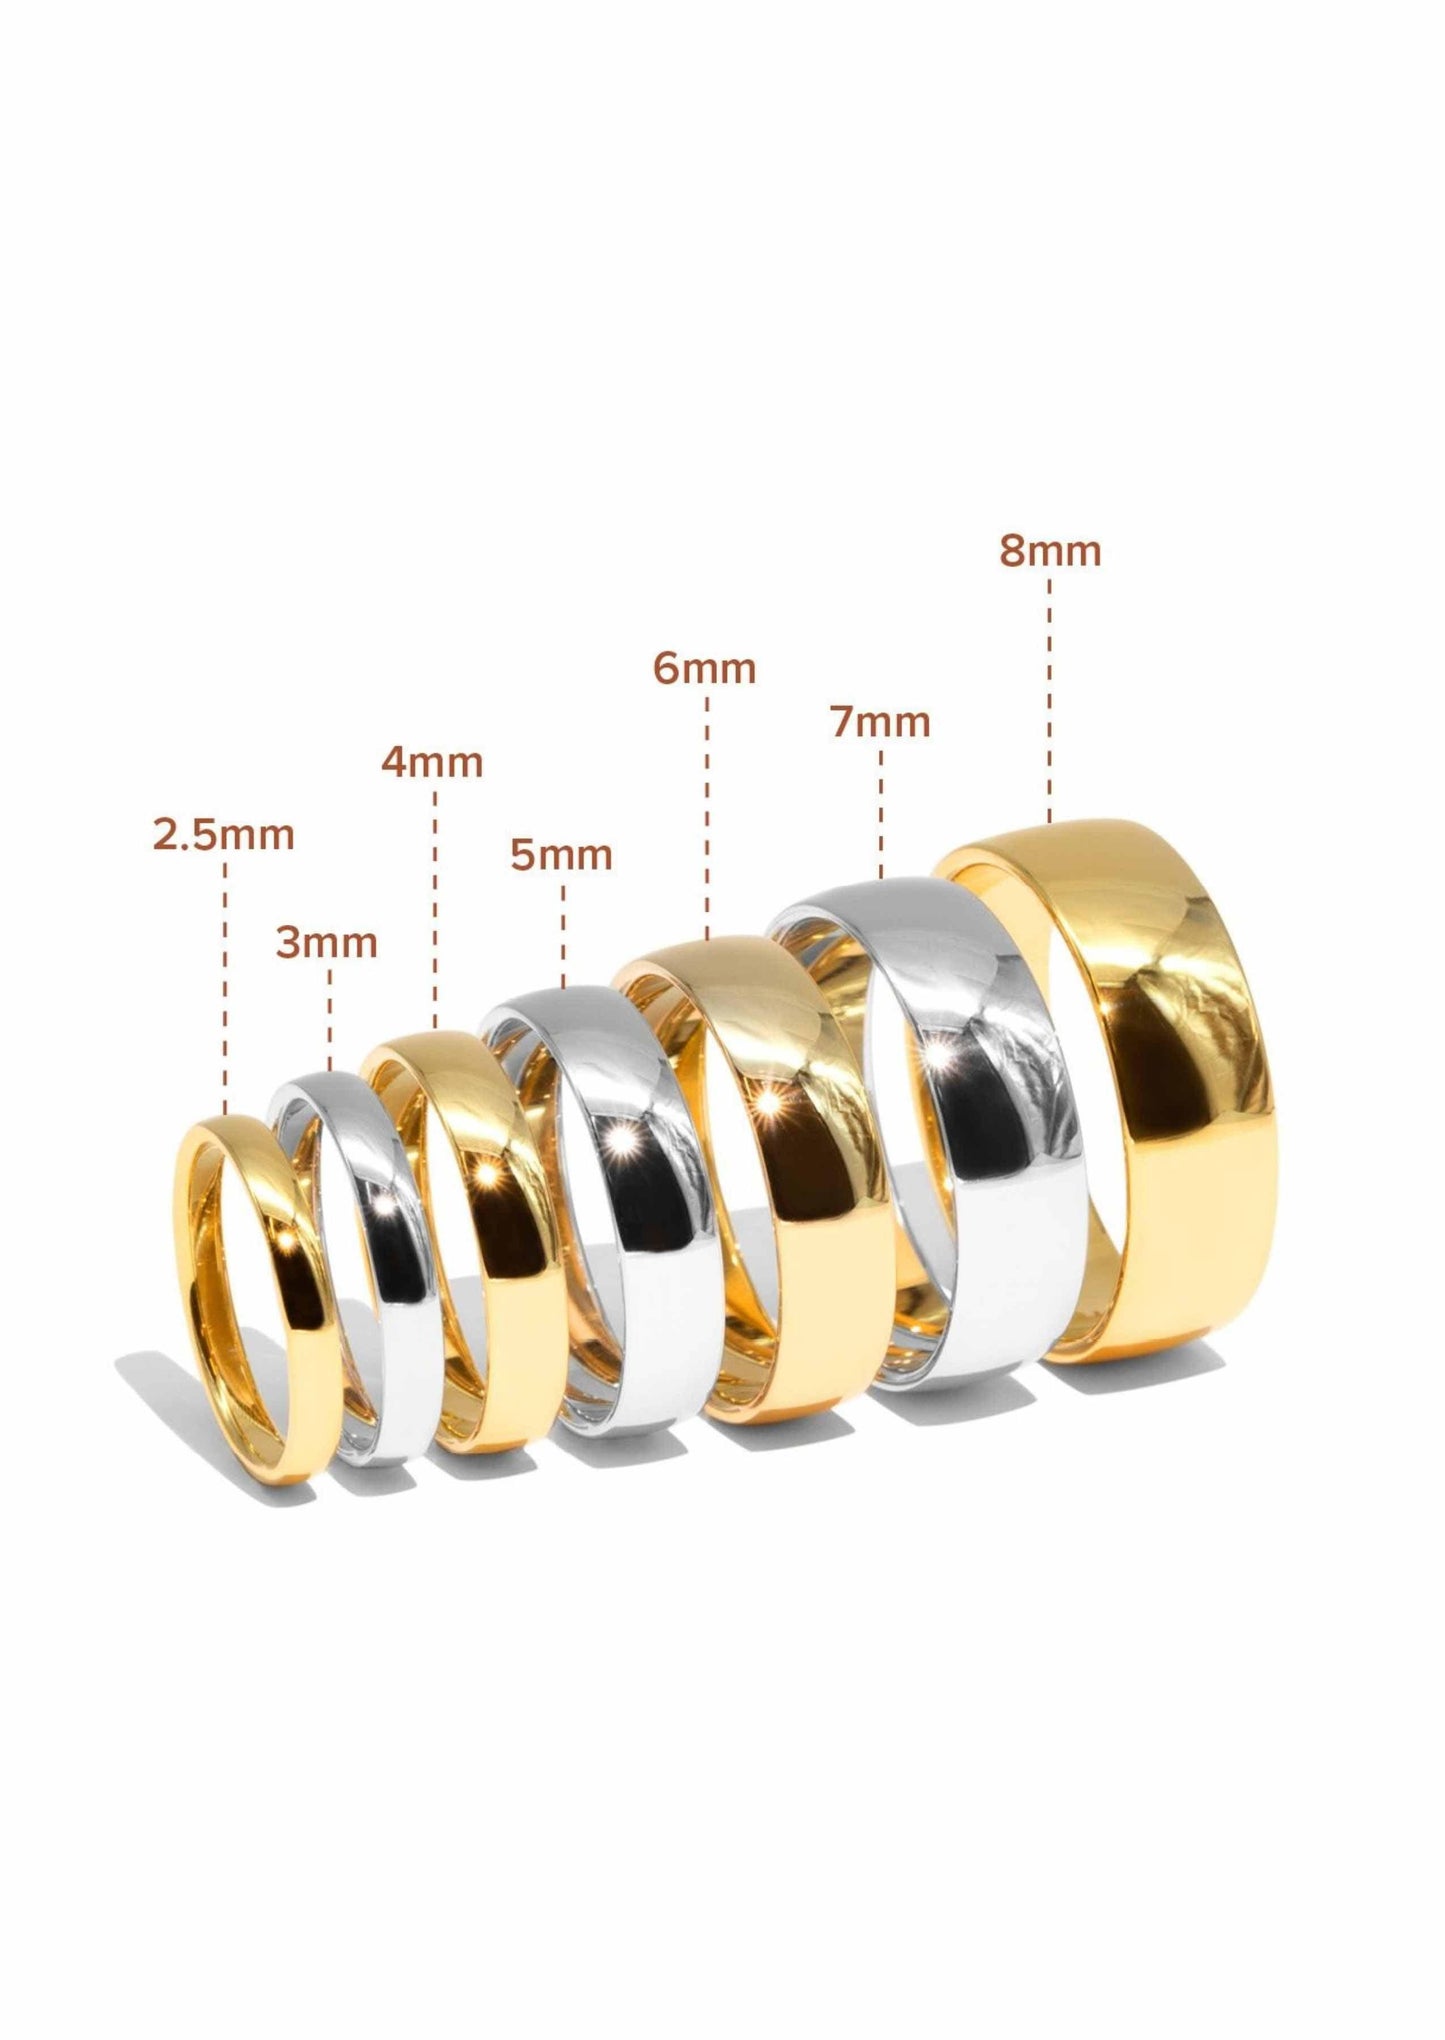 The Curved 9ct Solid Gold Band